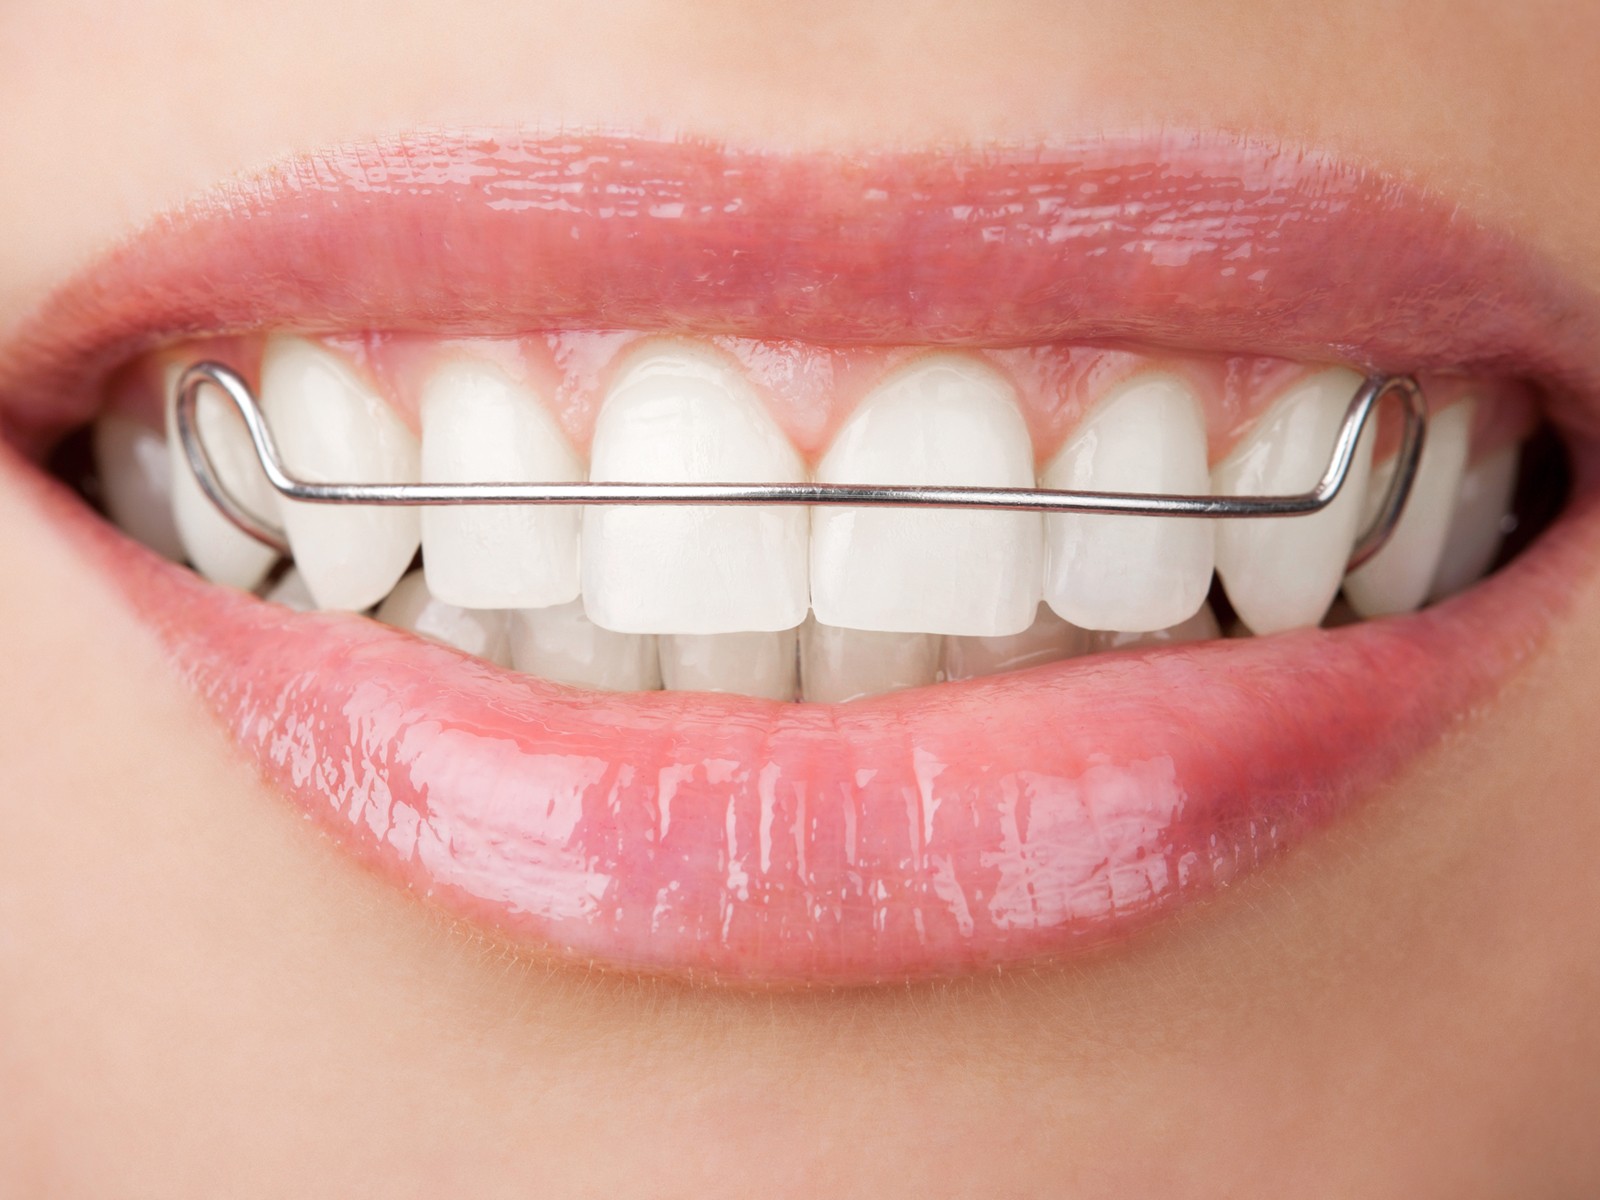 Can You Wear an Old Retainer to Straighten Teeth?